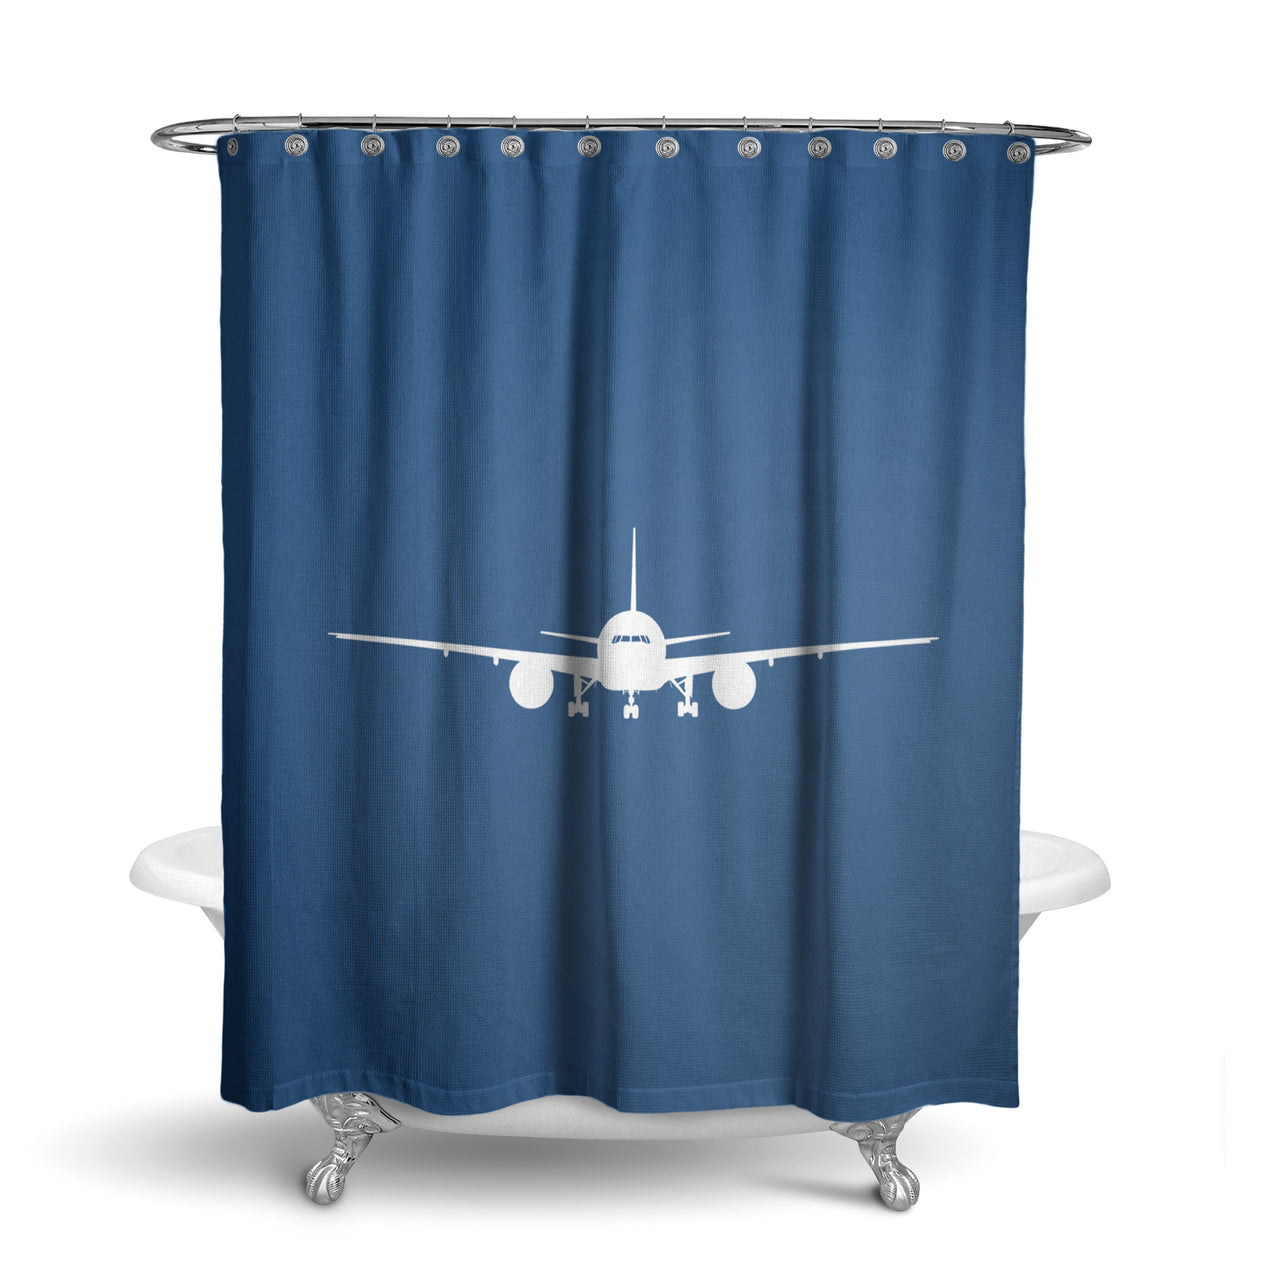 Boeing 777 Silhouette Designed Shower Curtains